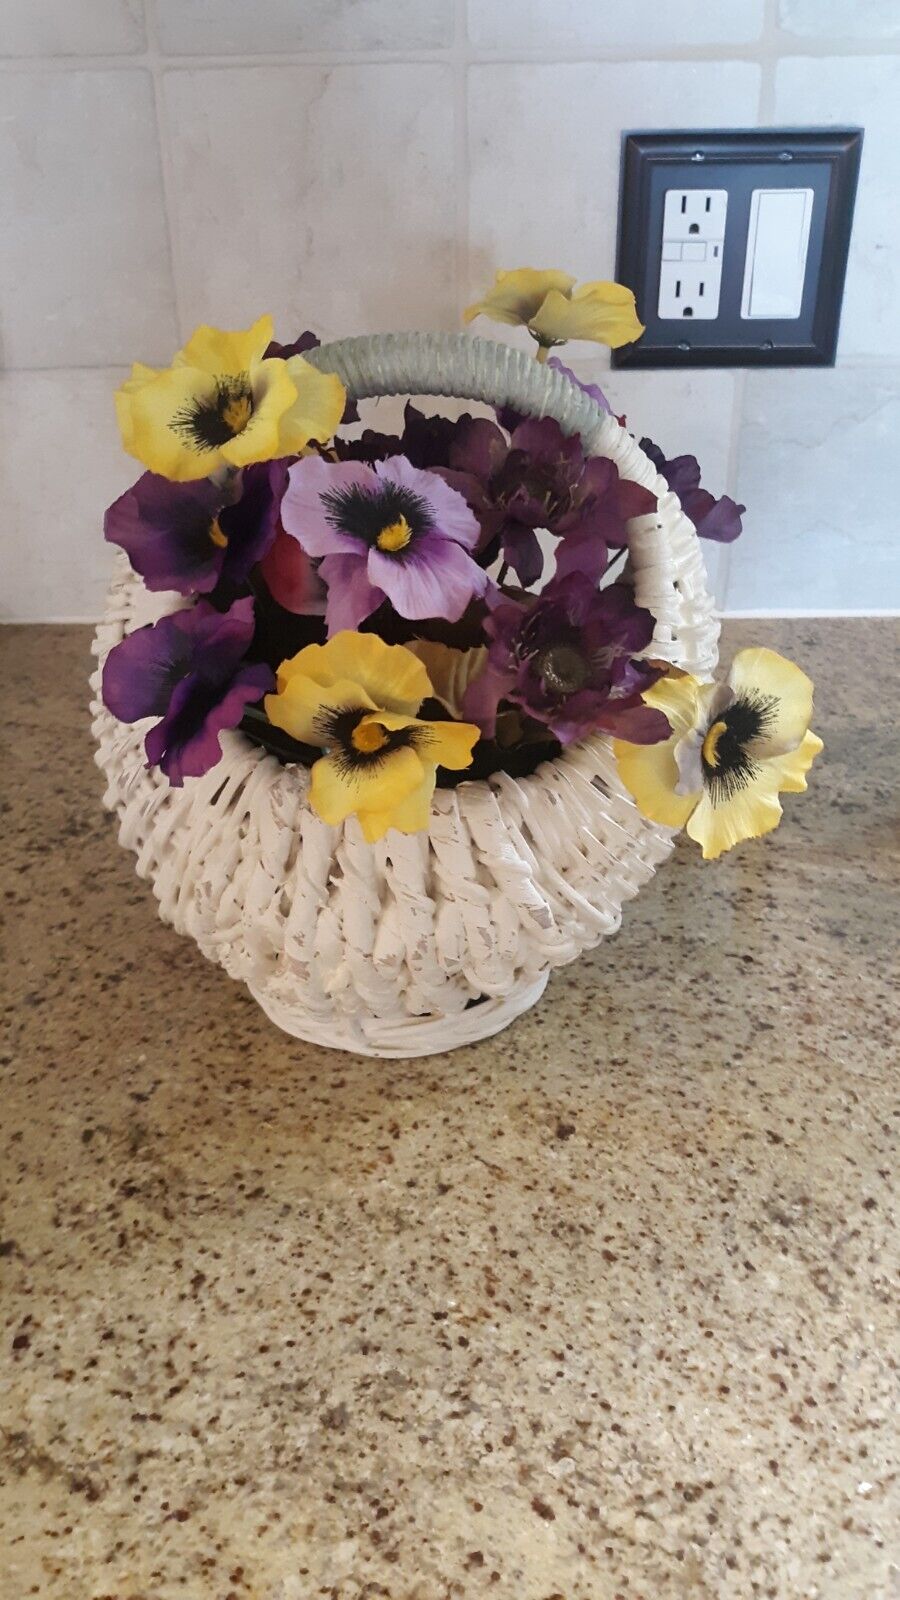 Handpainted & Lightly Distressed Small Egg Basket With Pansy Floral Arrangement 